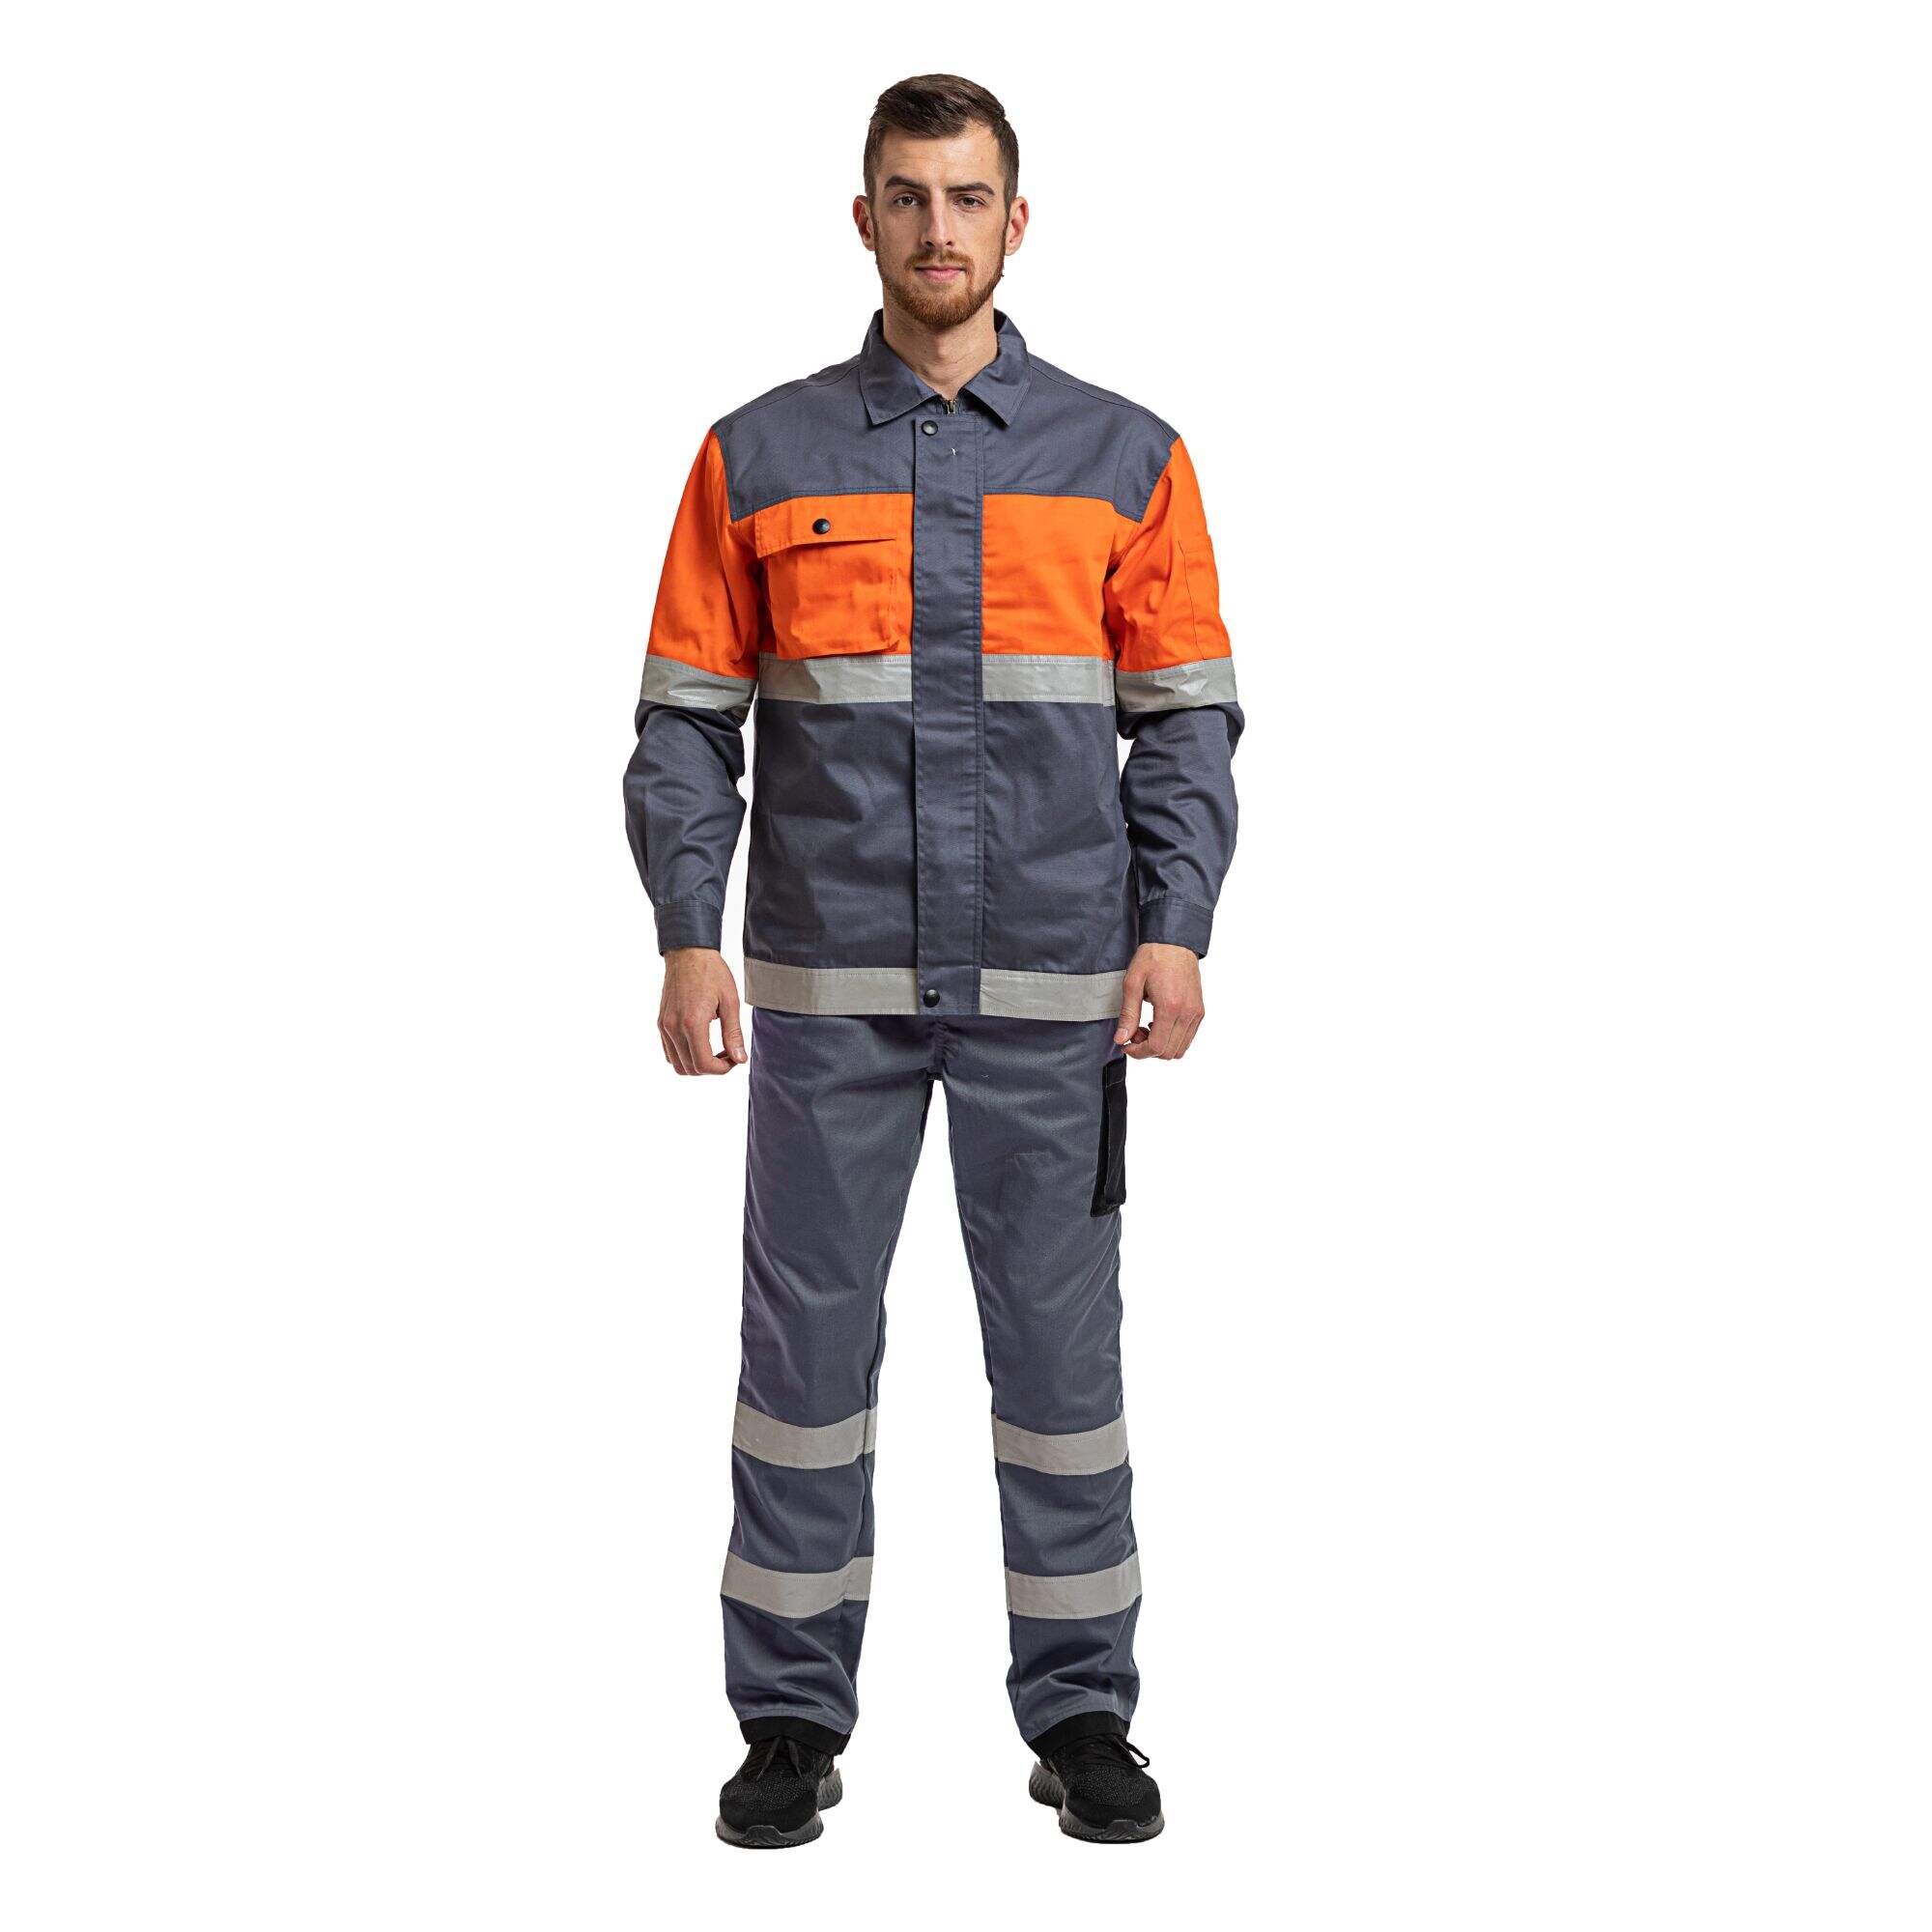 Dupont Nomex IIIA Flame Resistant Anti Static Workwear For Africa Petroleum Two Piece Work Uniform